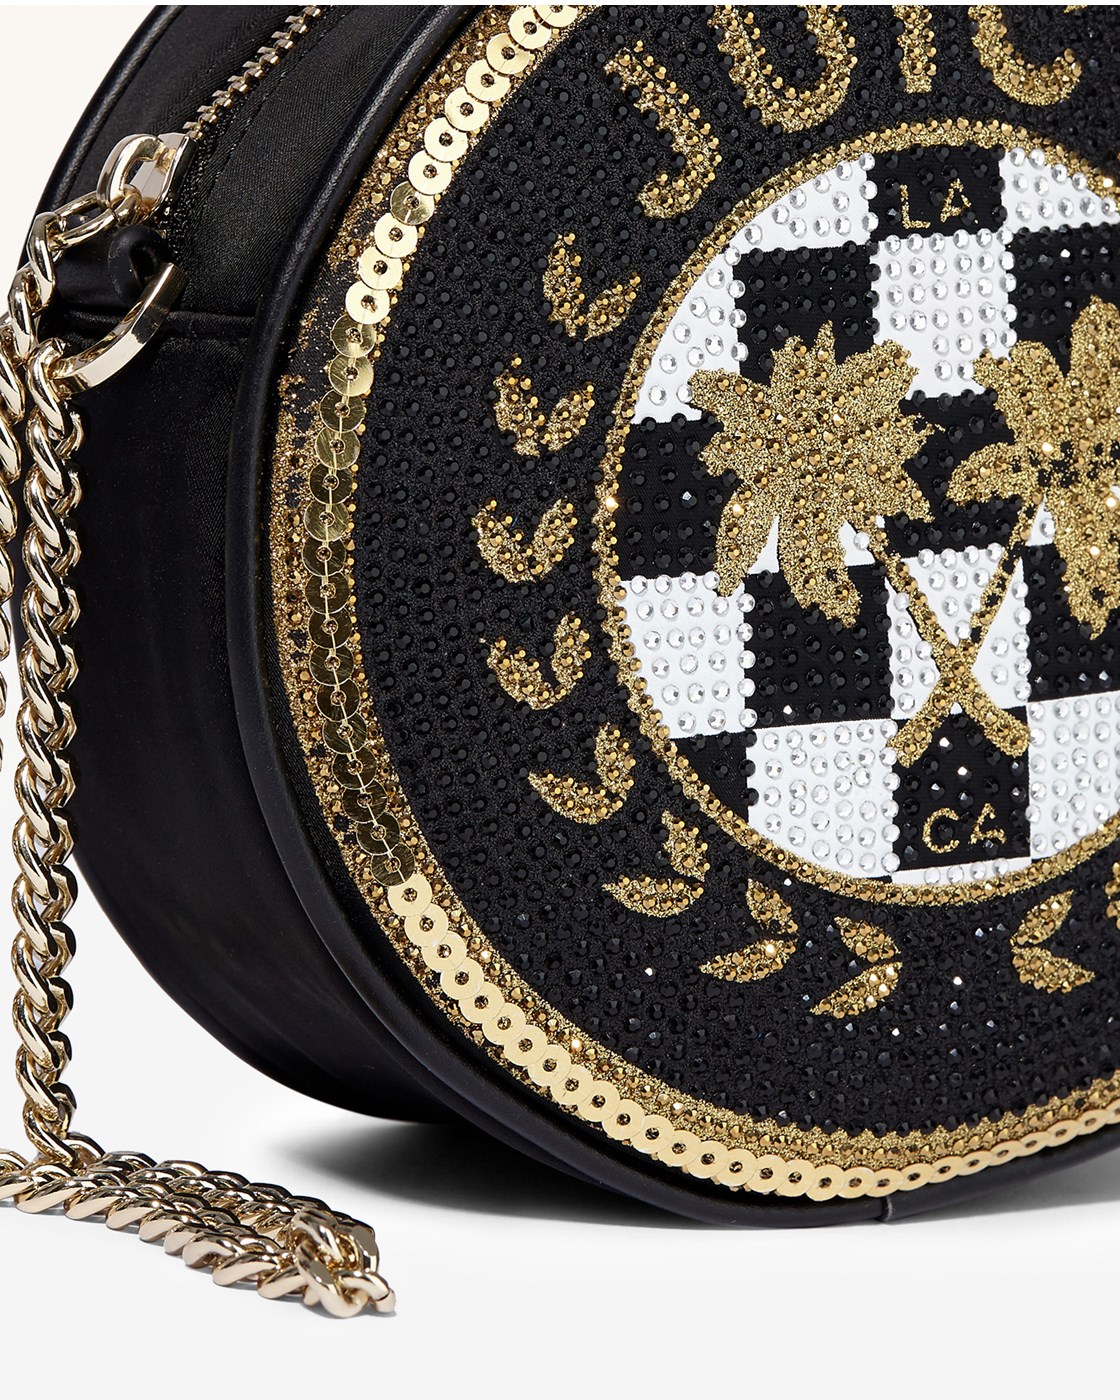 Juicy Couture Patterson Crossbody